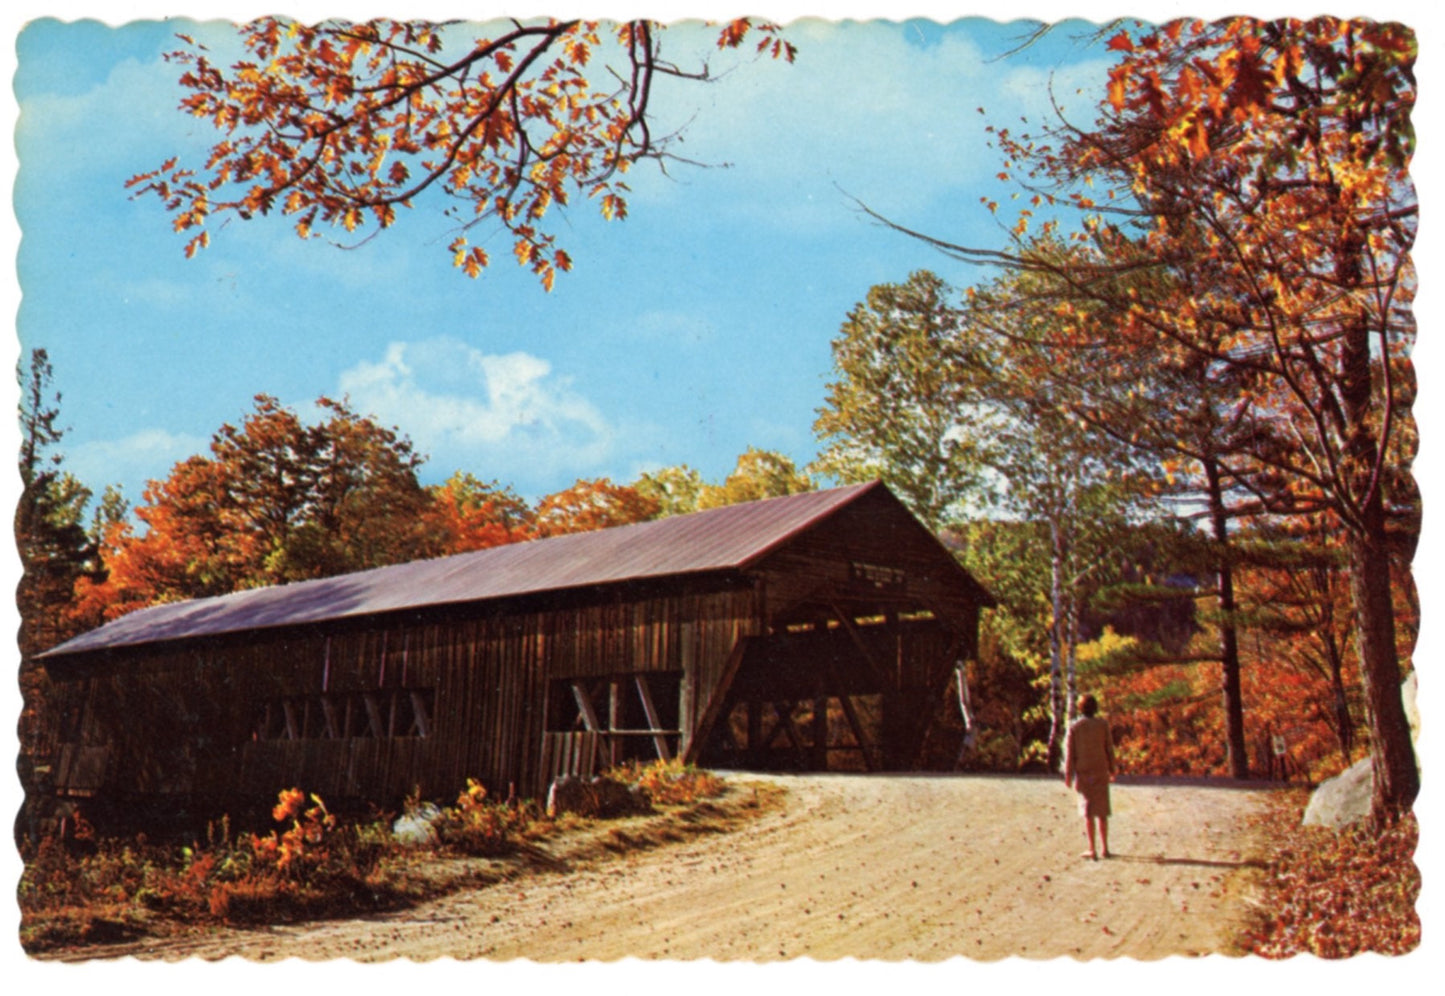 Old Ohio Covered Bridge #3 "Greetings from MARIETTA OHIO" Collection Large Vintage Postcard 4" x 6"